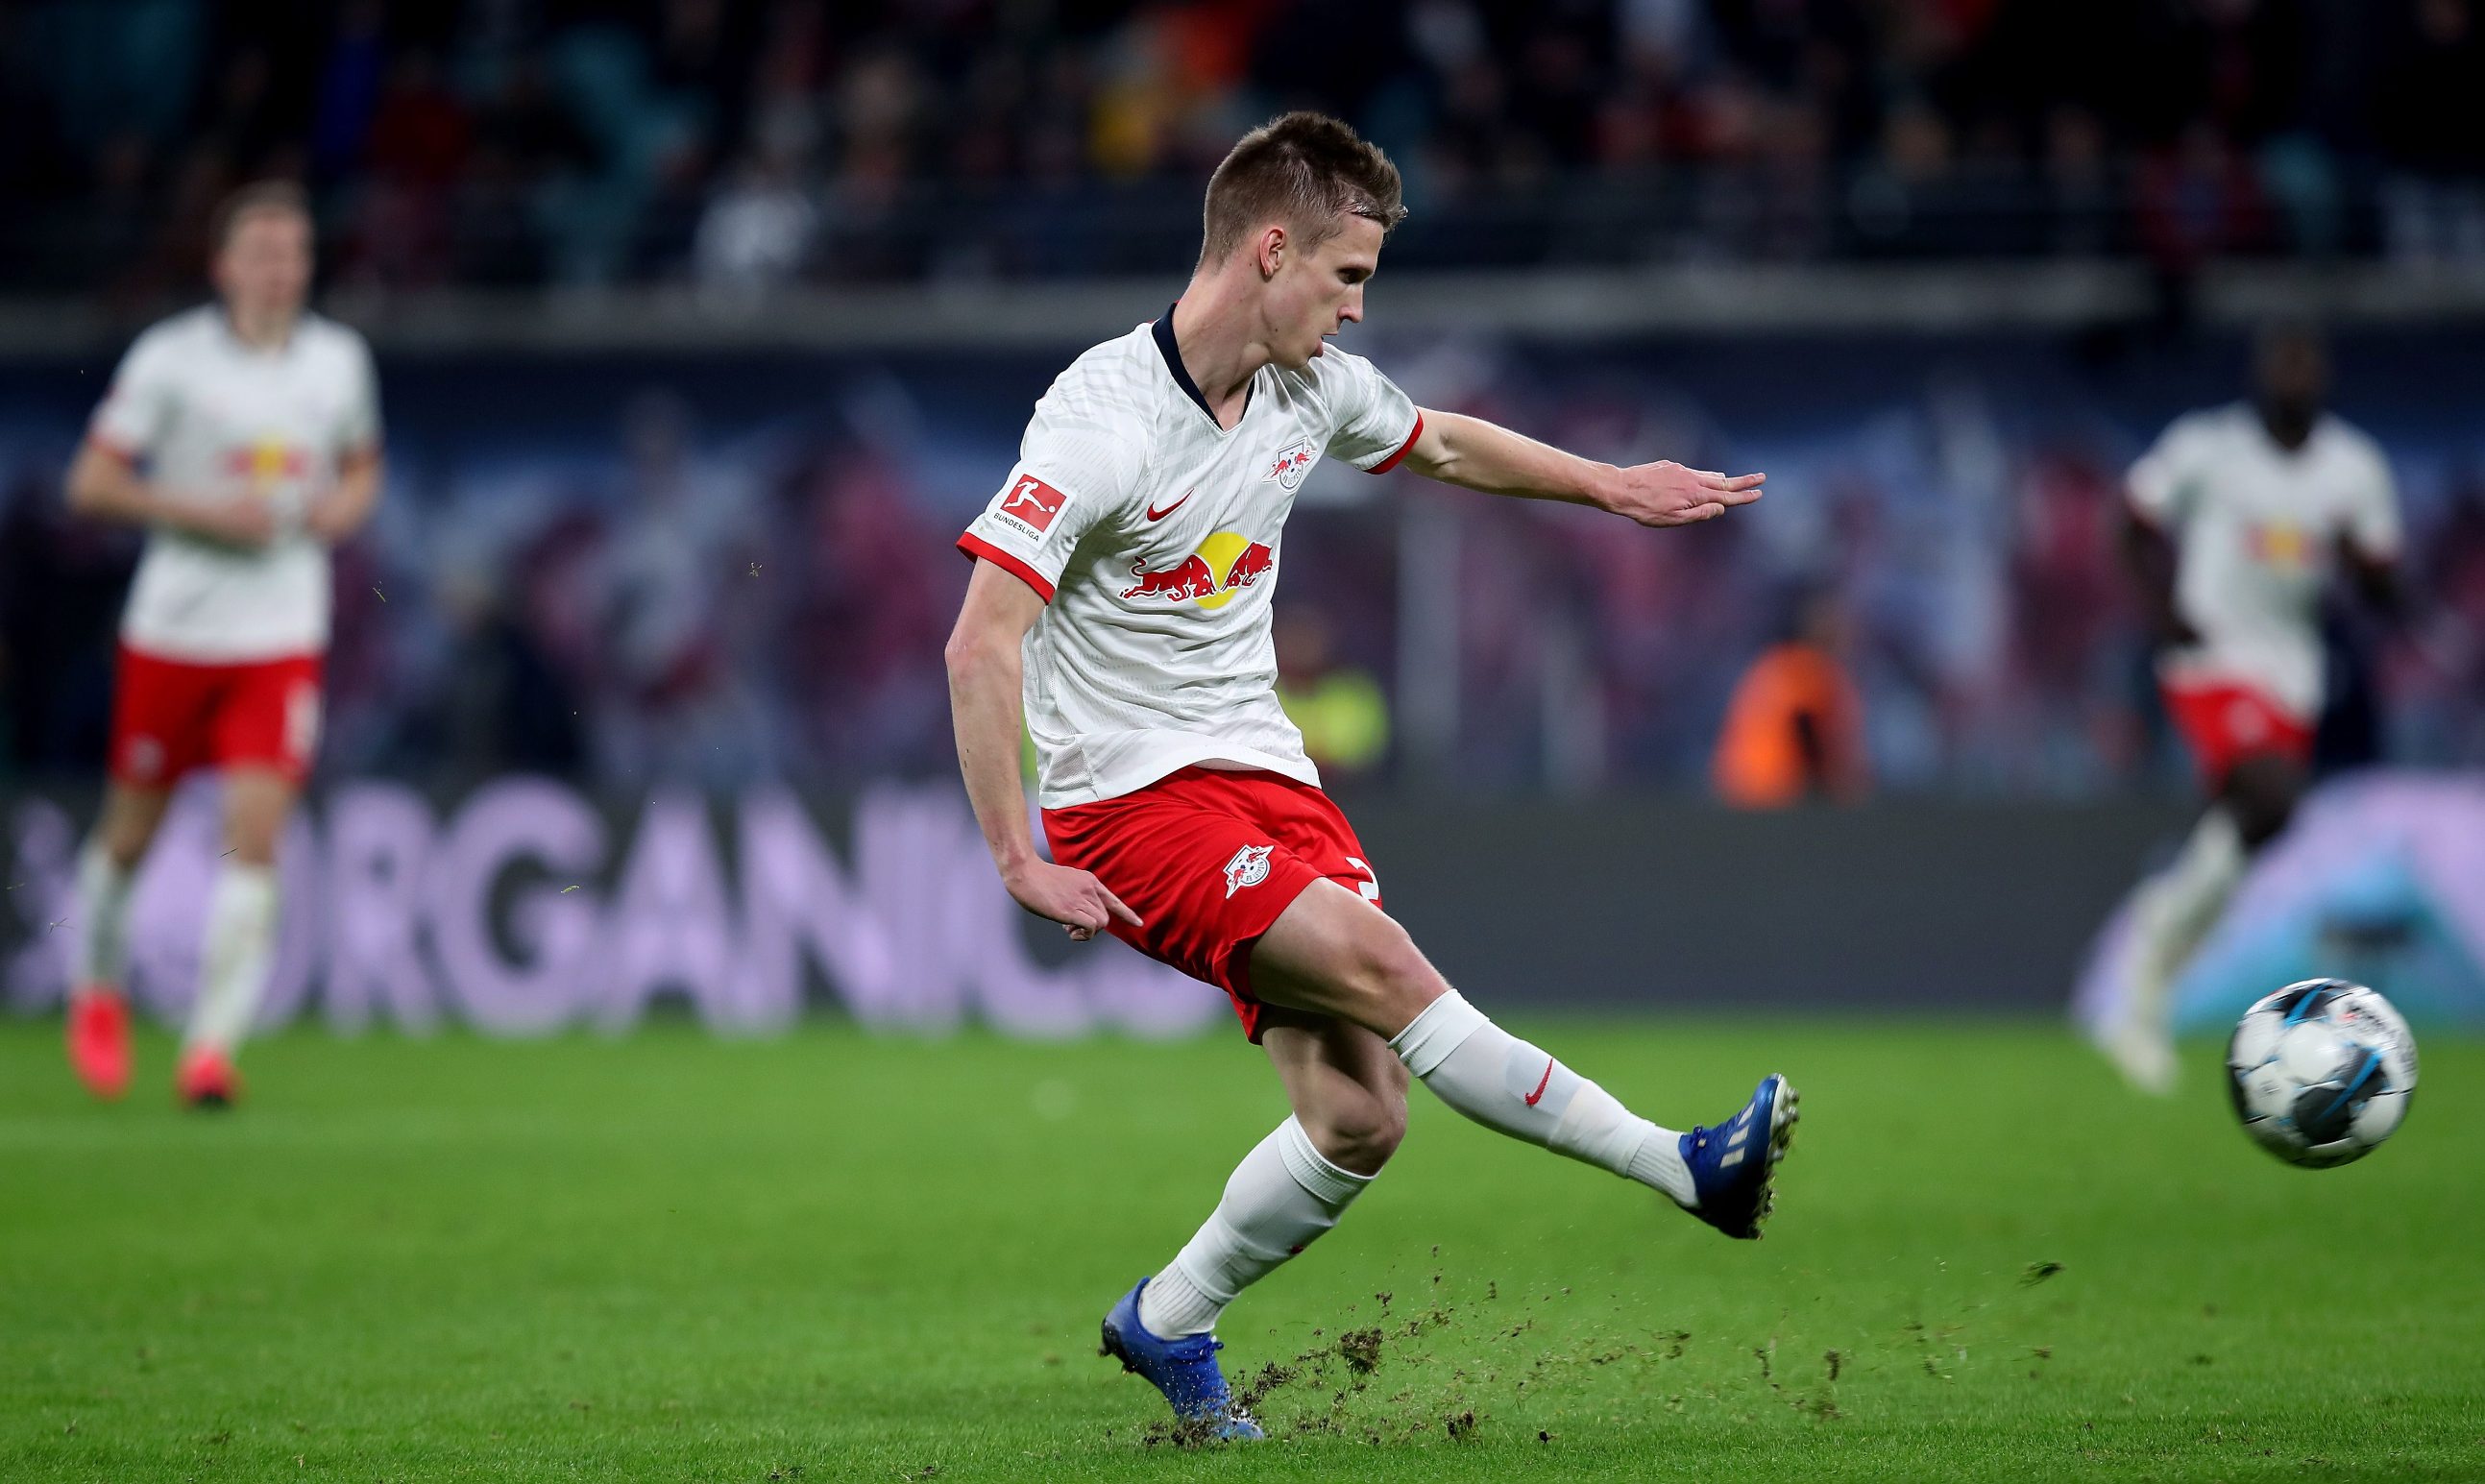 Leipzig's Spain midfielder Dani Olmo kicks the ball during the German first division Bundesliga football match RB Leipzig v Borussia Moenchengladbach in Leipzig on February 1, 2020. (Photo by Ronny Hartmann / AFP) / RESTRICTIONS: DFL REGULATIONS PROHIBIT ANY USE OF PHOTOGRAPHS AS IMAGE SEQUENCES AND/OR QUASI-VIDEO